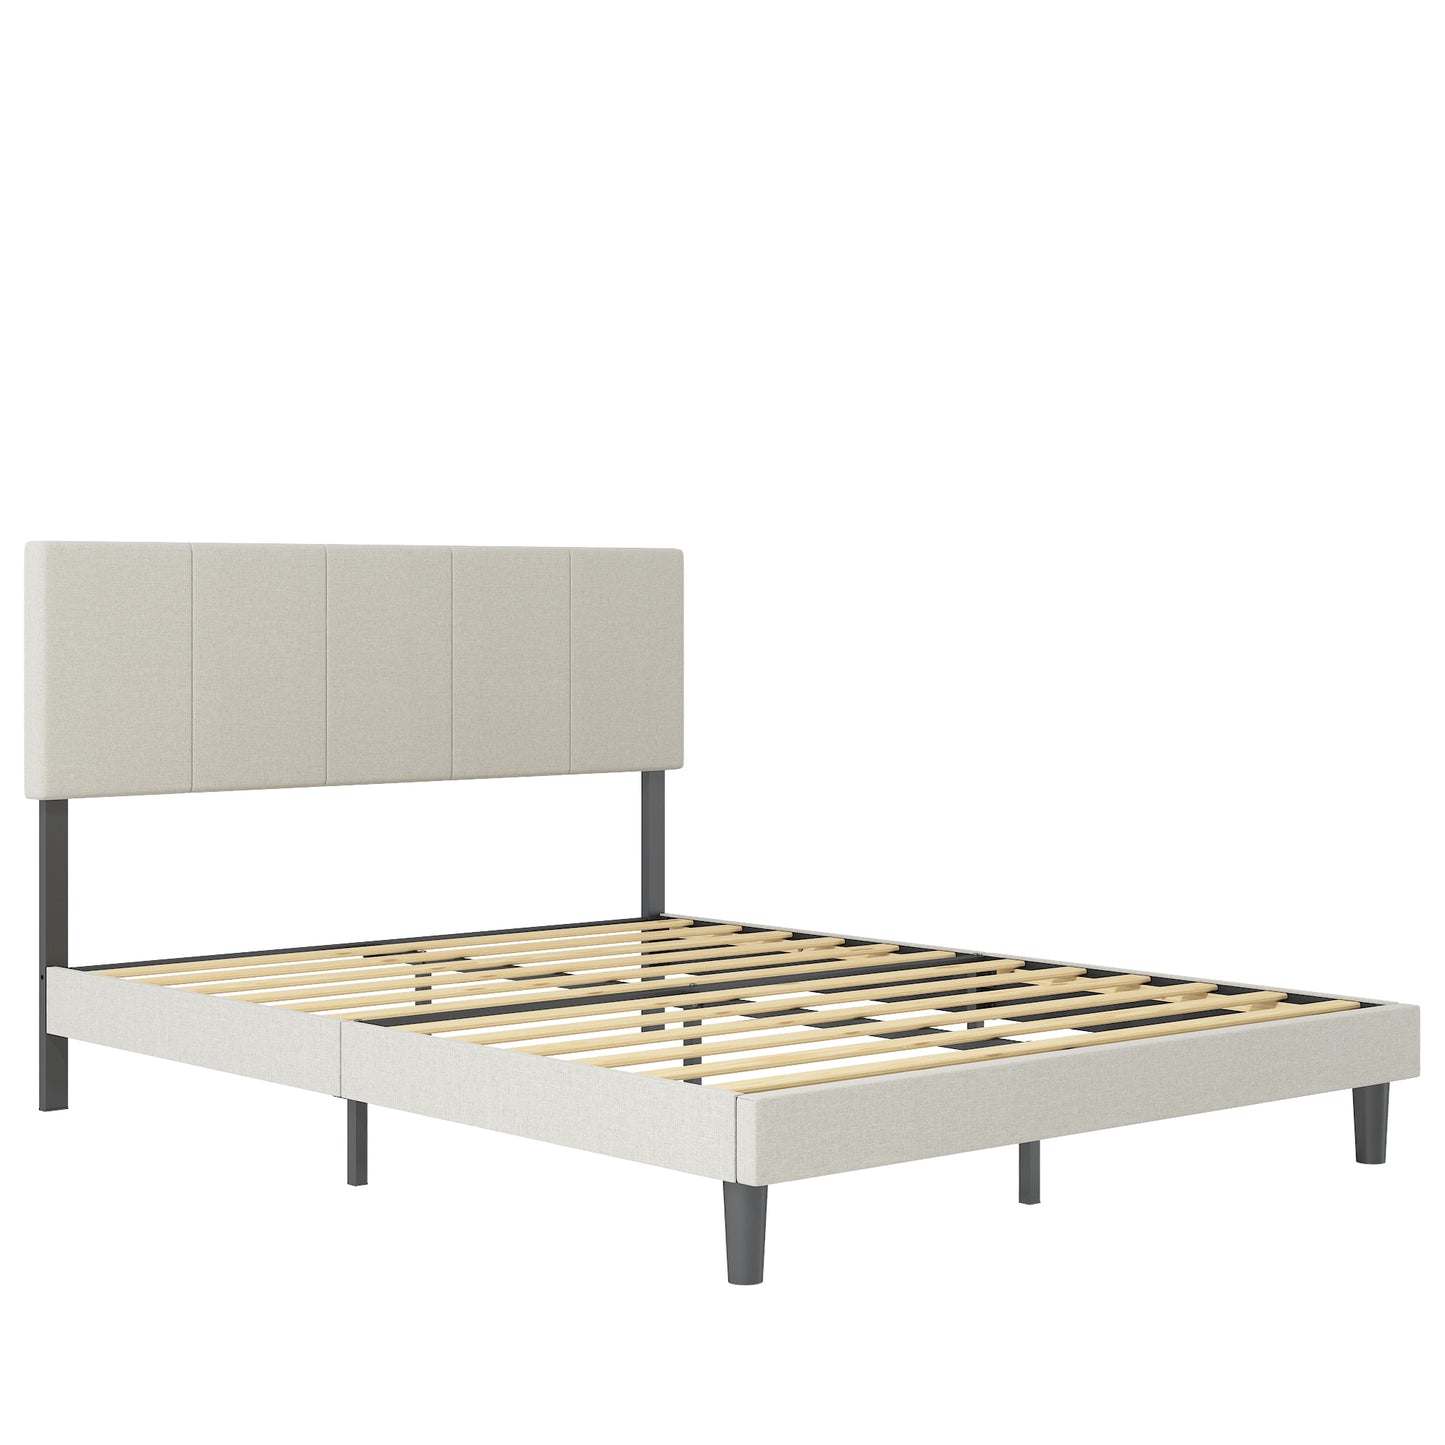 SYNGAR Black Upholstered Velvet Platform Bed Frame Queen Size with Elegant Headboard, Sturdy Frame Bedroom Furniture with Strong Wooden Slat Support, 800LBS Weight Capacity